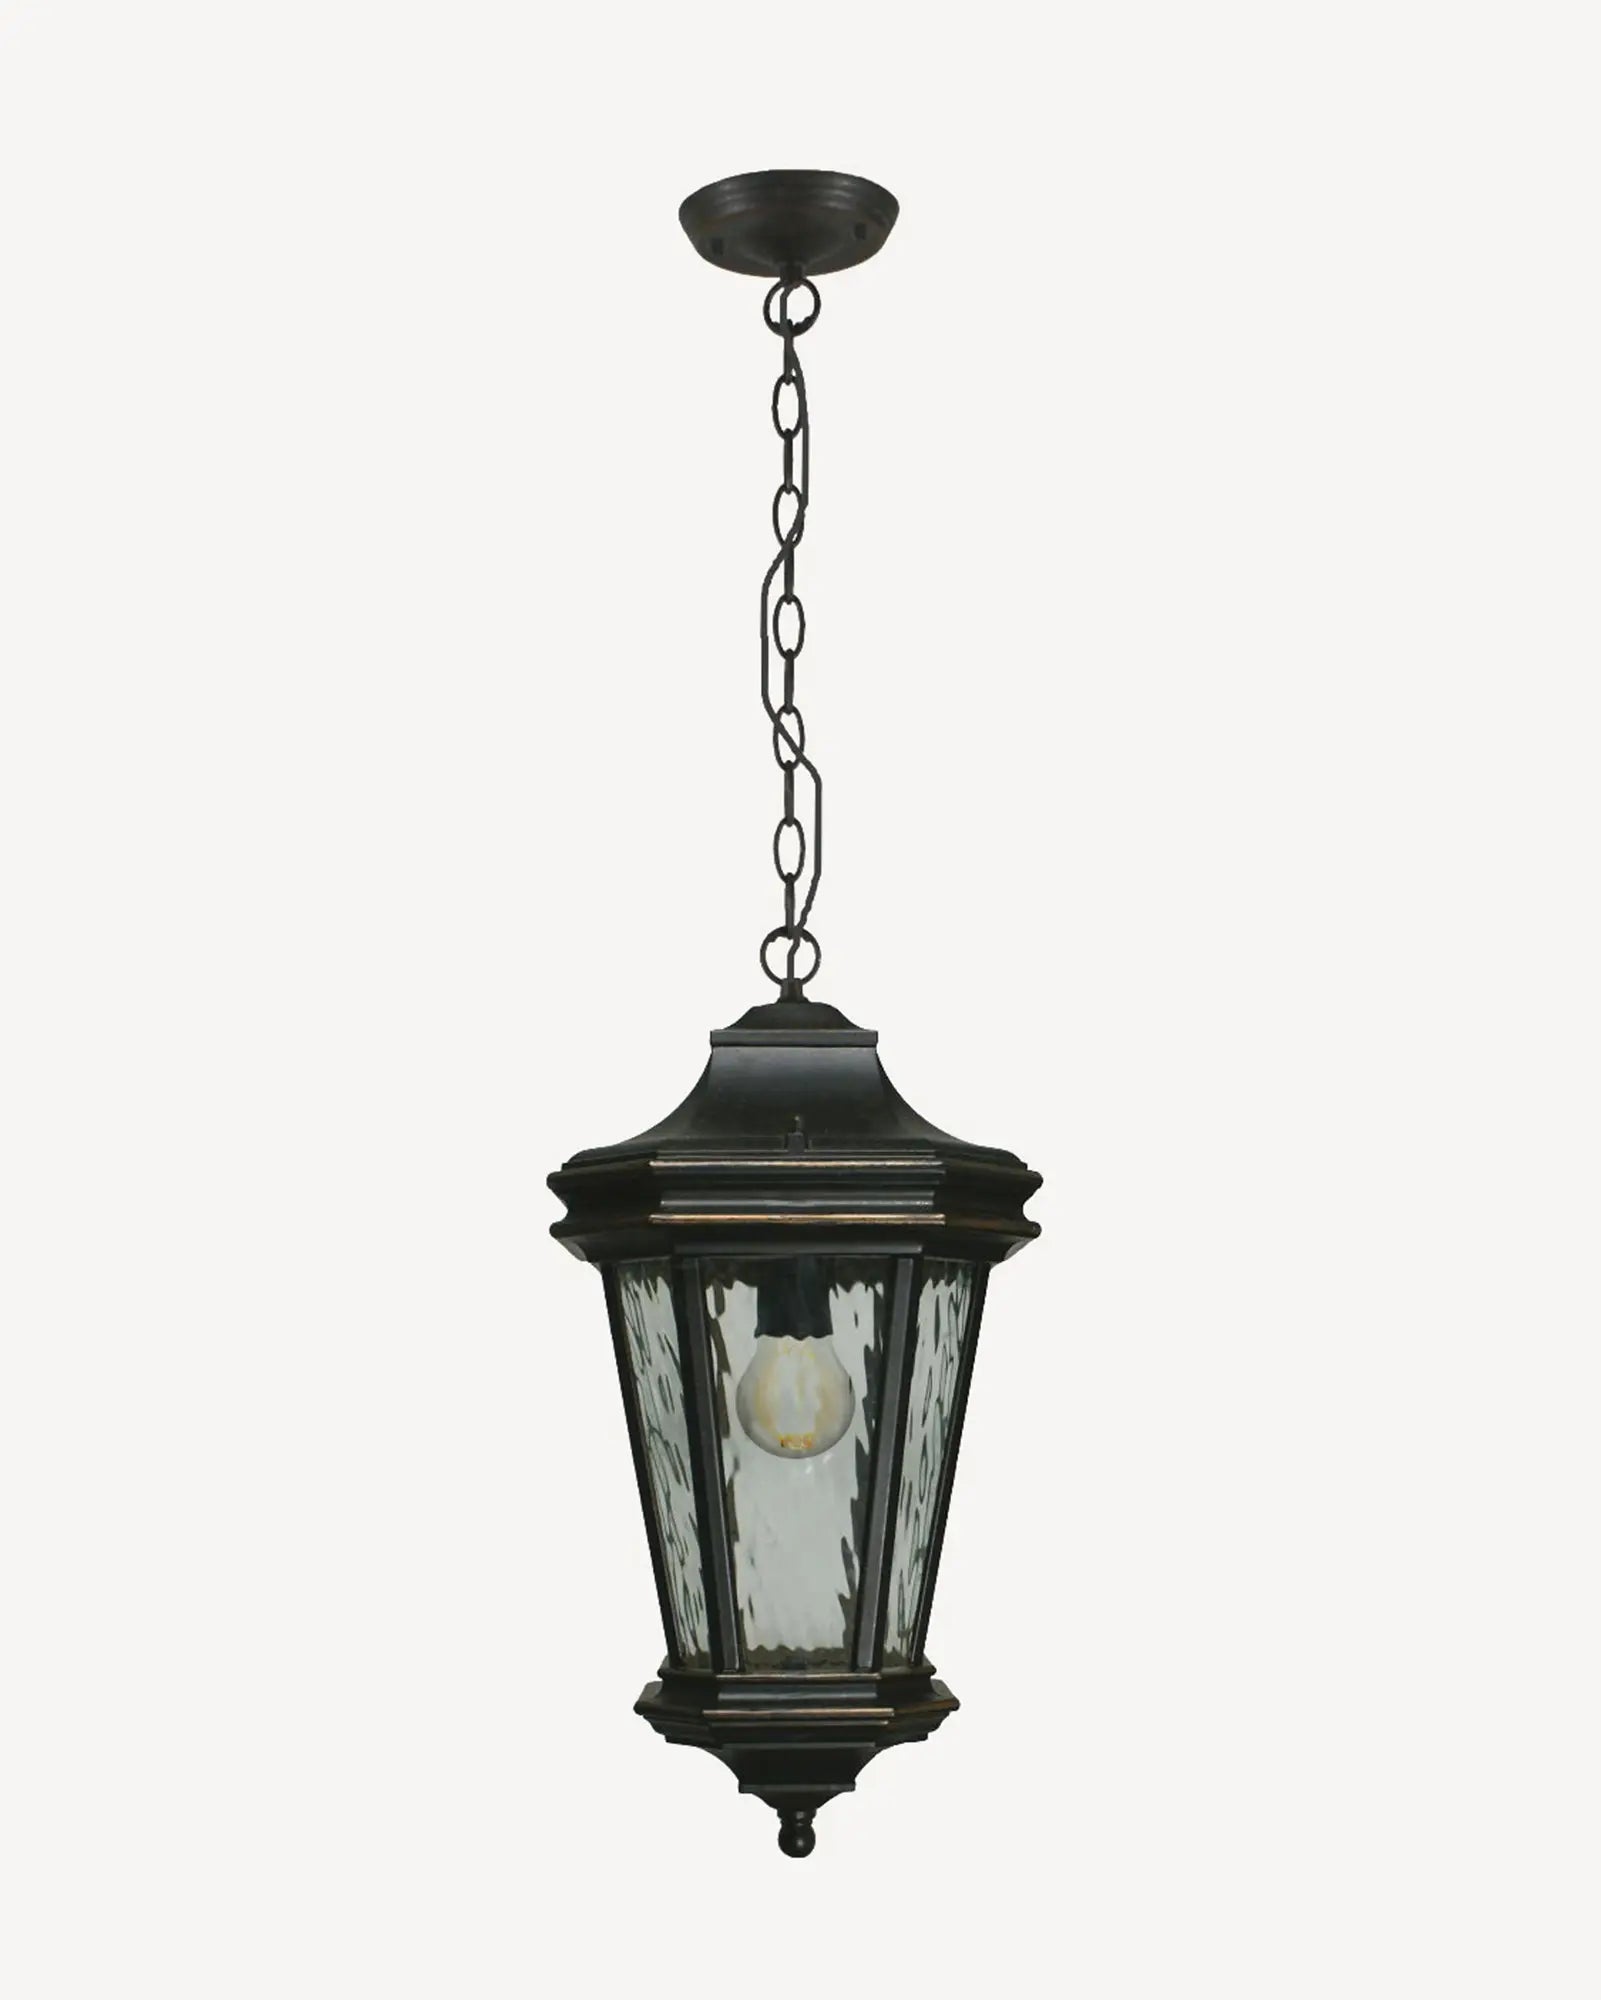 Tilburn indoor pendant light by Inspiration Light at Nook Collections